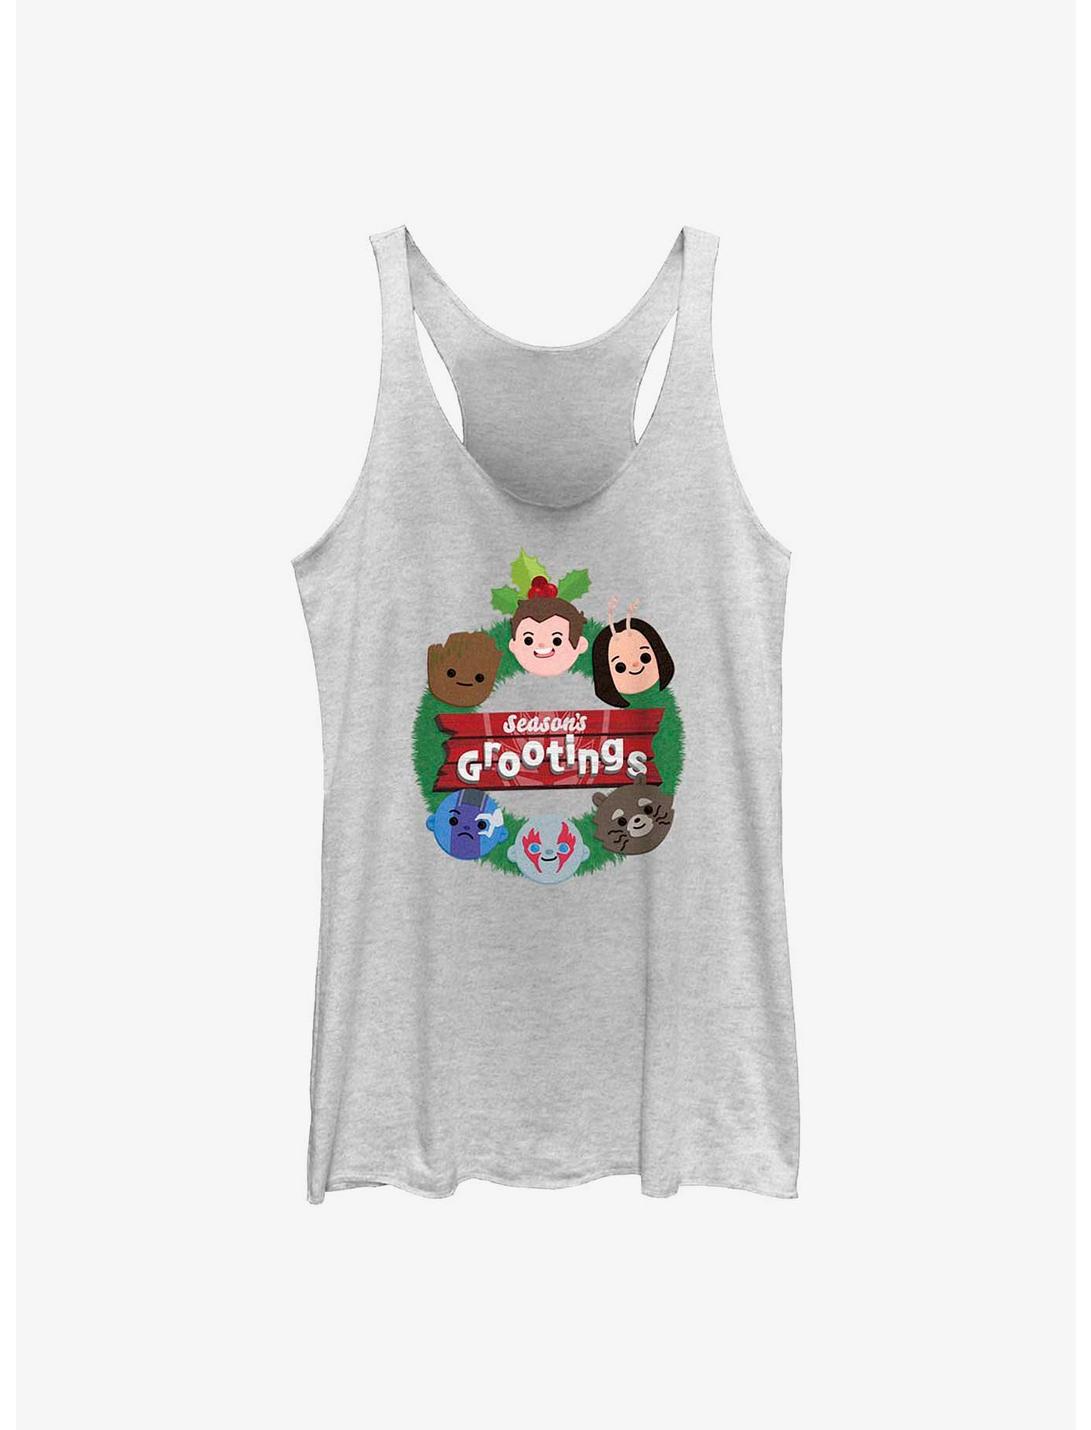 Marvel Guardians of the Galaxy Holiday Special Seasons Grootings Girls Tank, WHITE HTR, hi-res